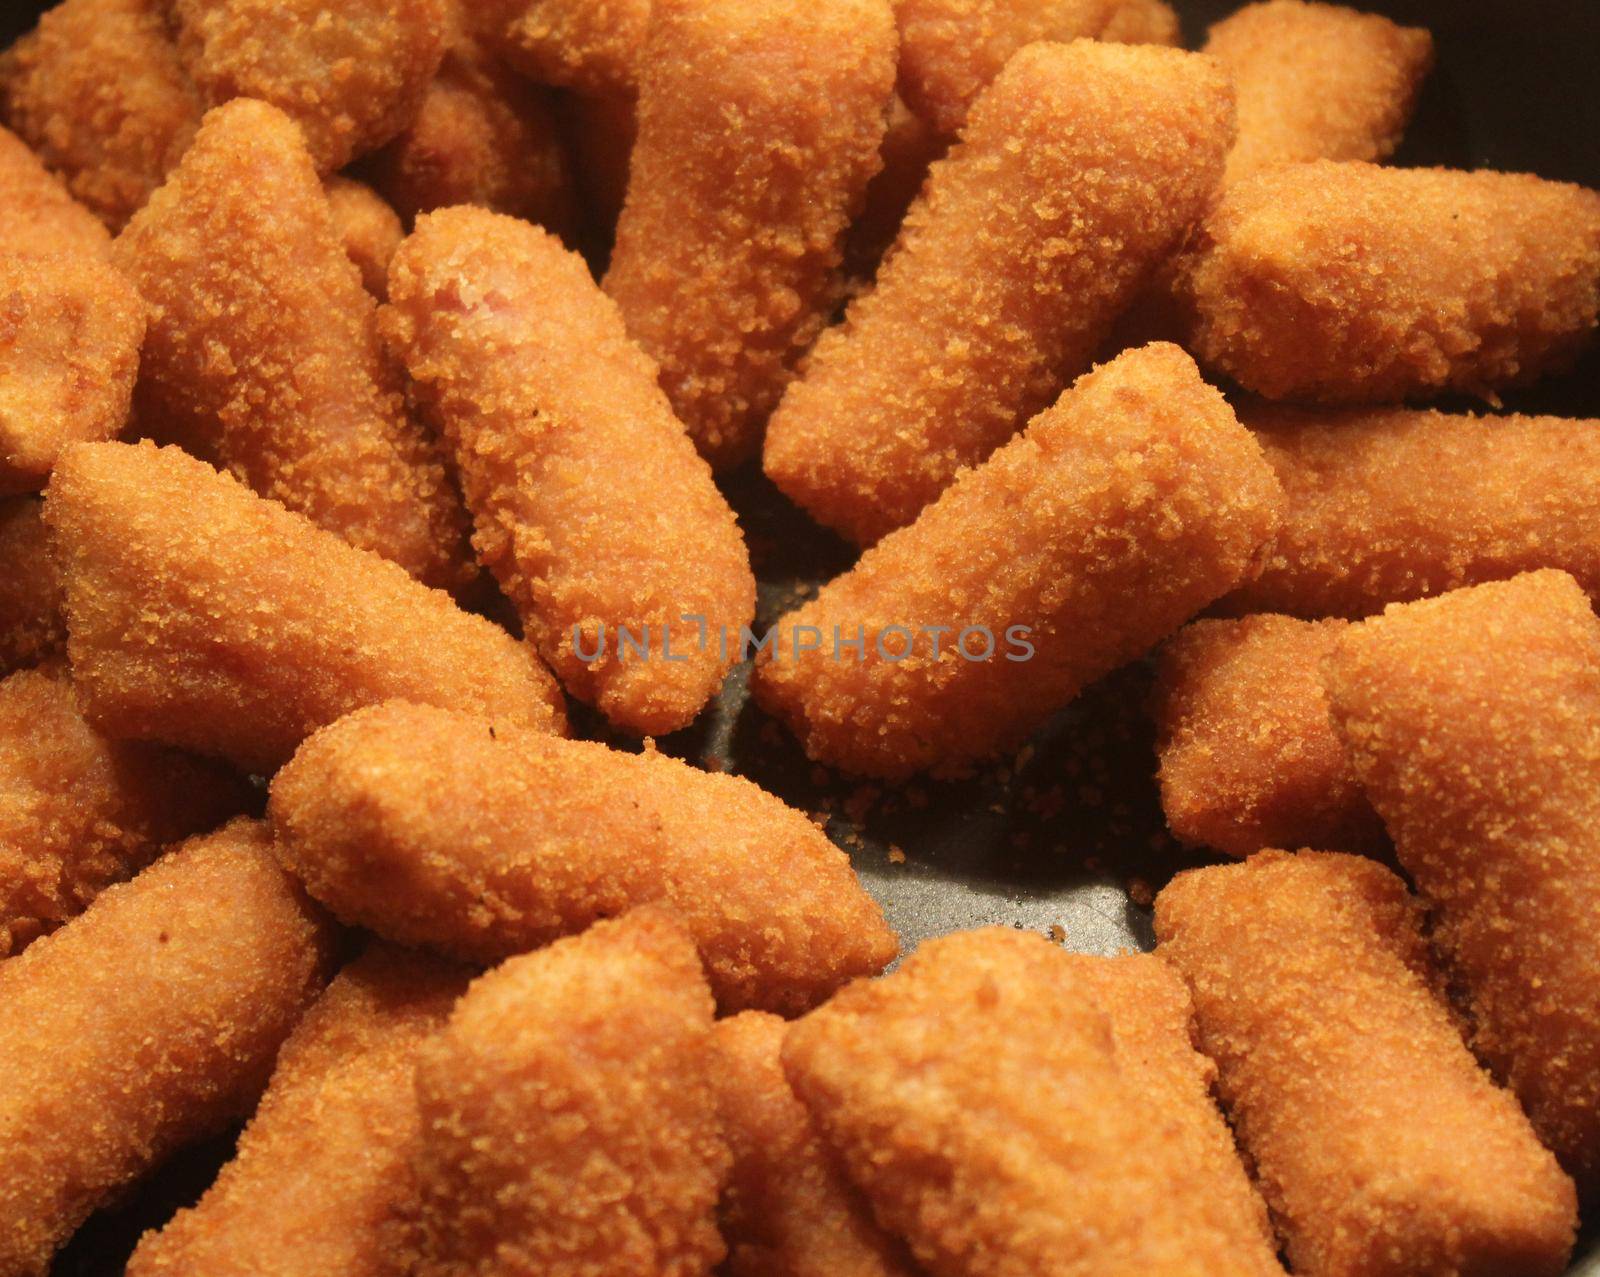 golden chicken nuggets by JackyBrown